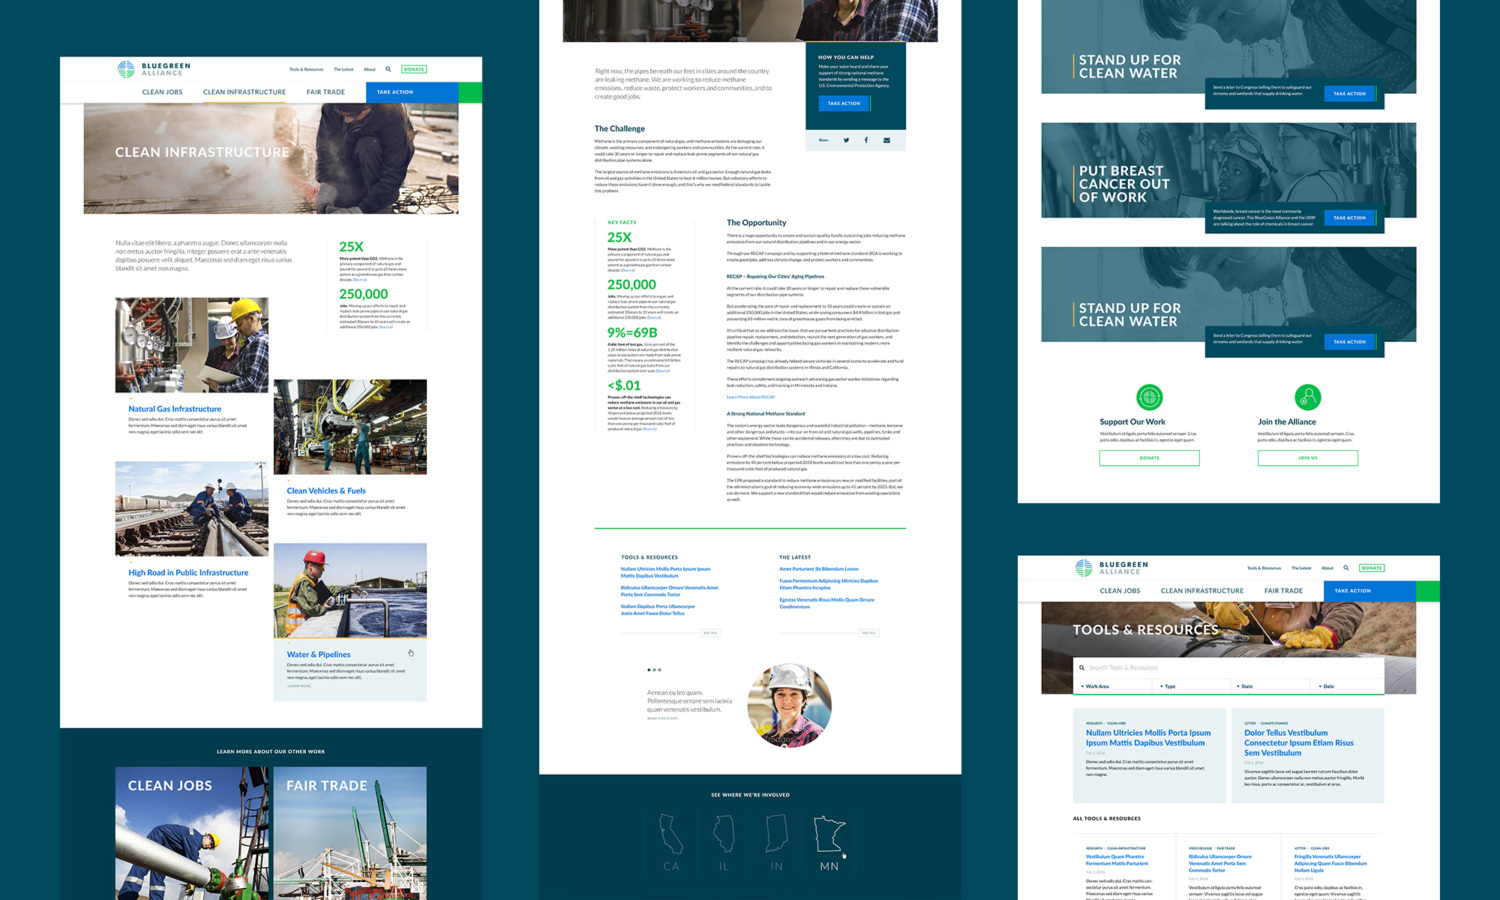 Collage of other page designs for the BlueGreen Alliance website